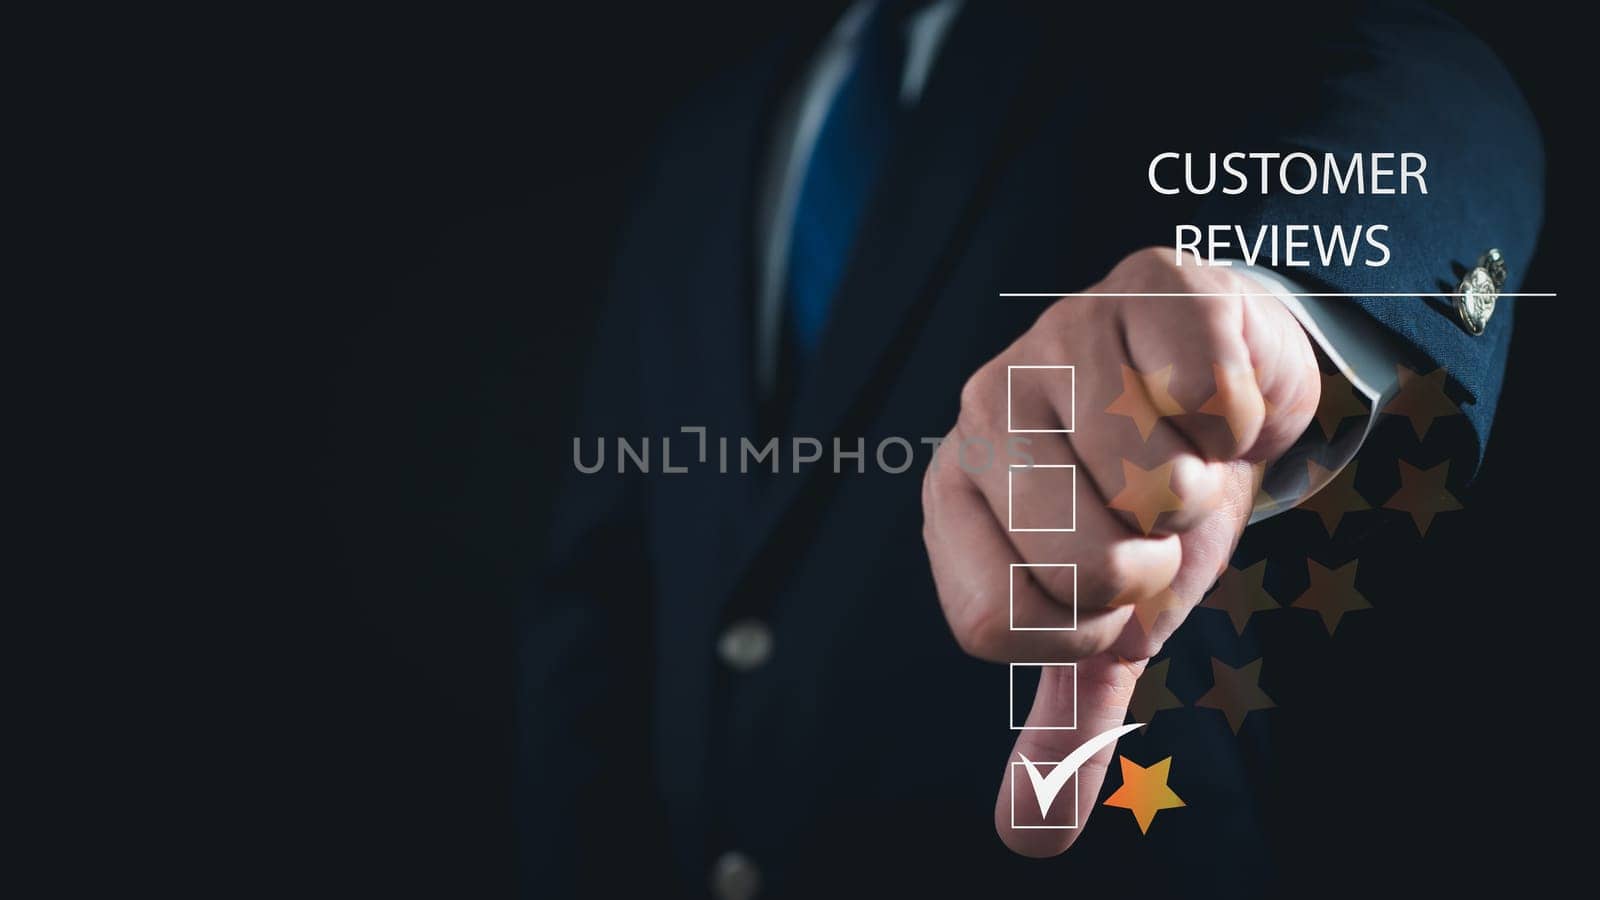 concept customer dissatisfaction experience. The businessman rated one star for the service provided. Poor reviews, poor service, dislikes, poor quality, low ratings, bad social media. by Unimages2527